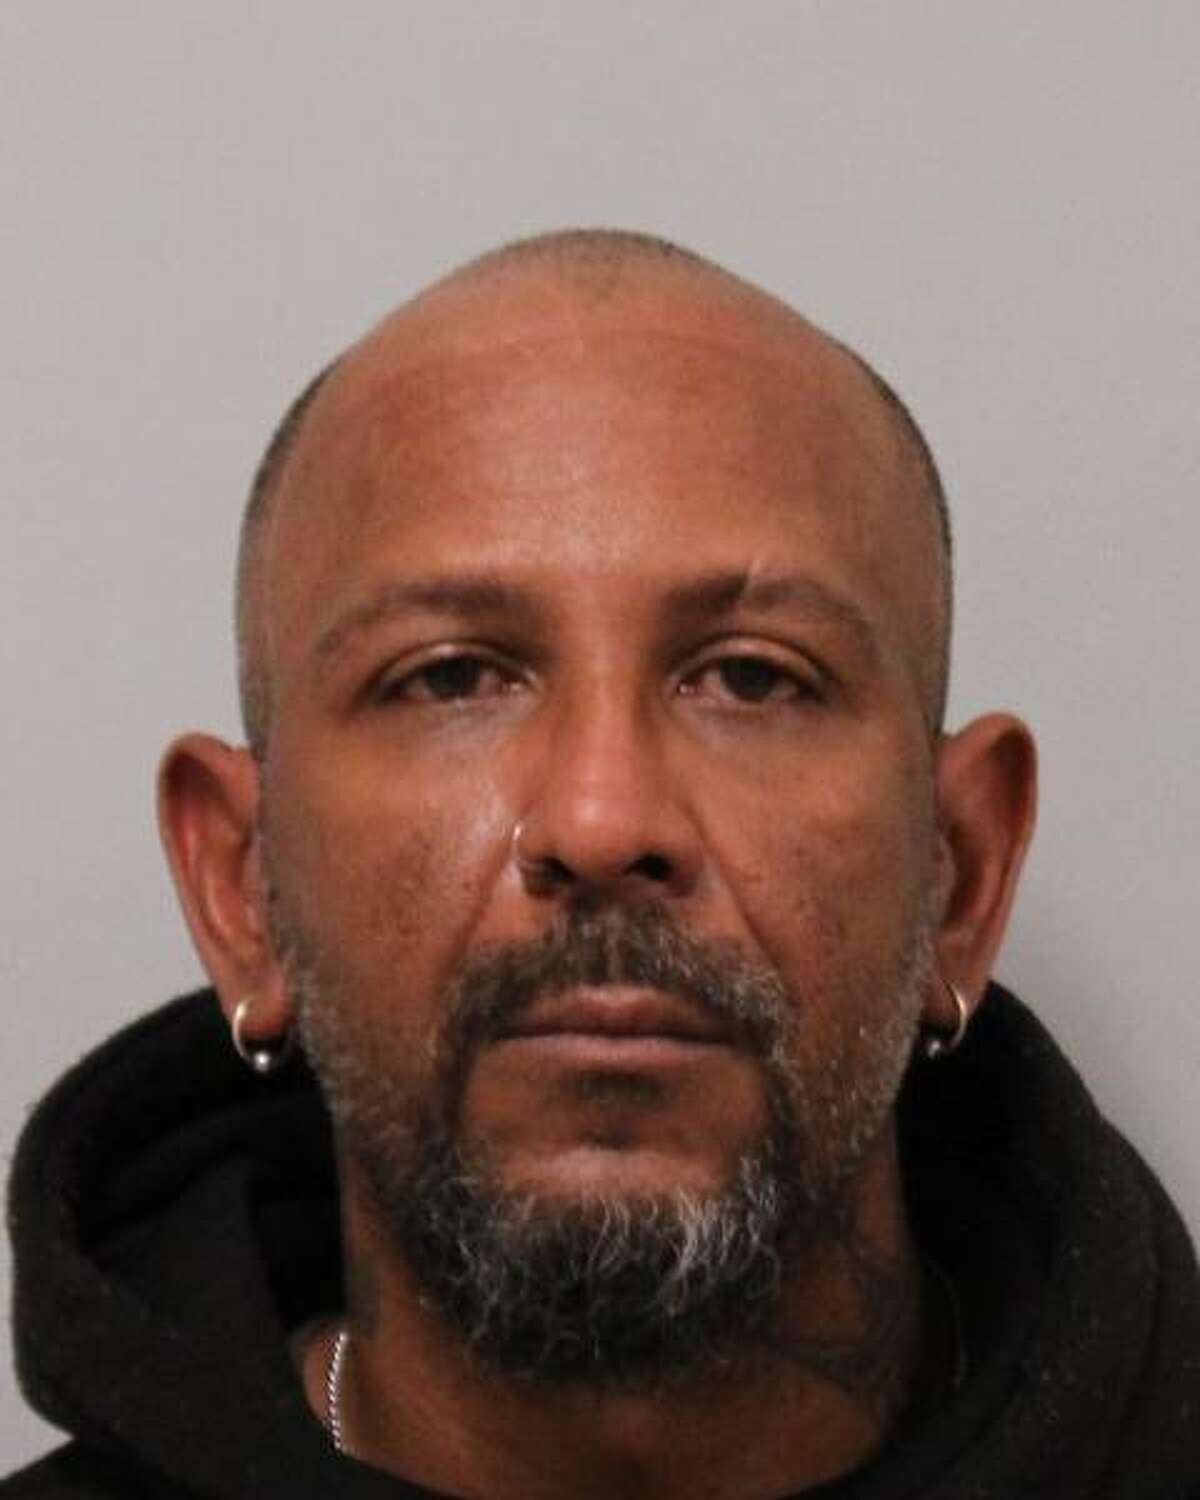 Luis Fernandez, 46, of Kingston is accused of several sex crimes and failed to show in court, State Police say.